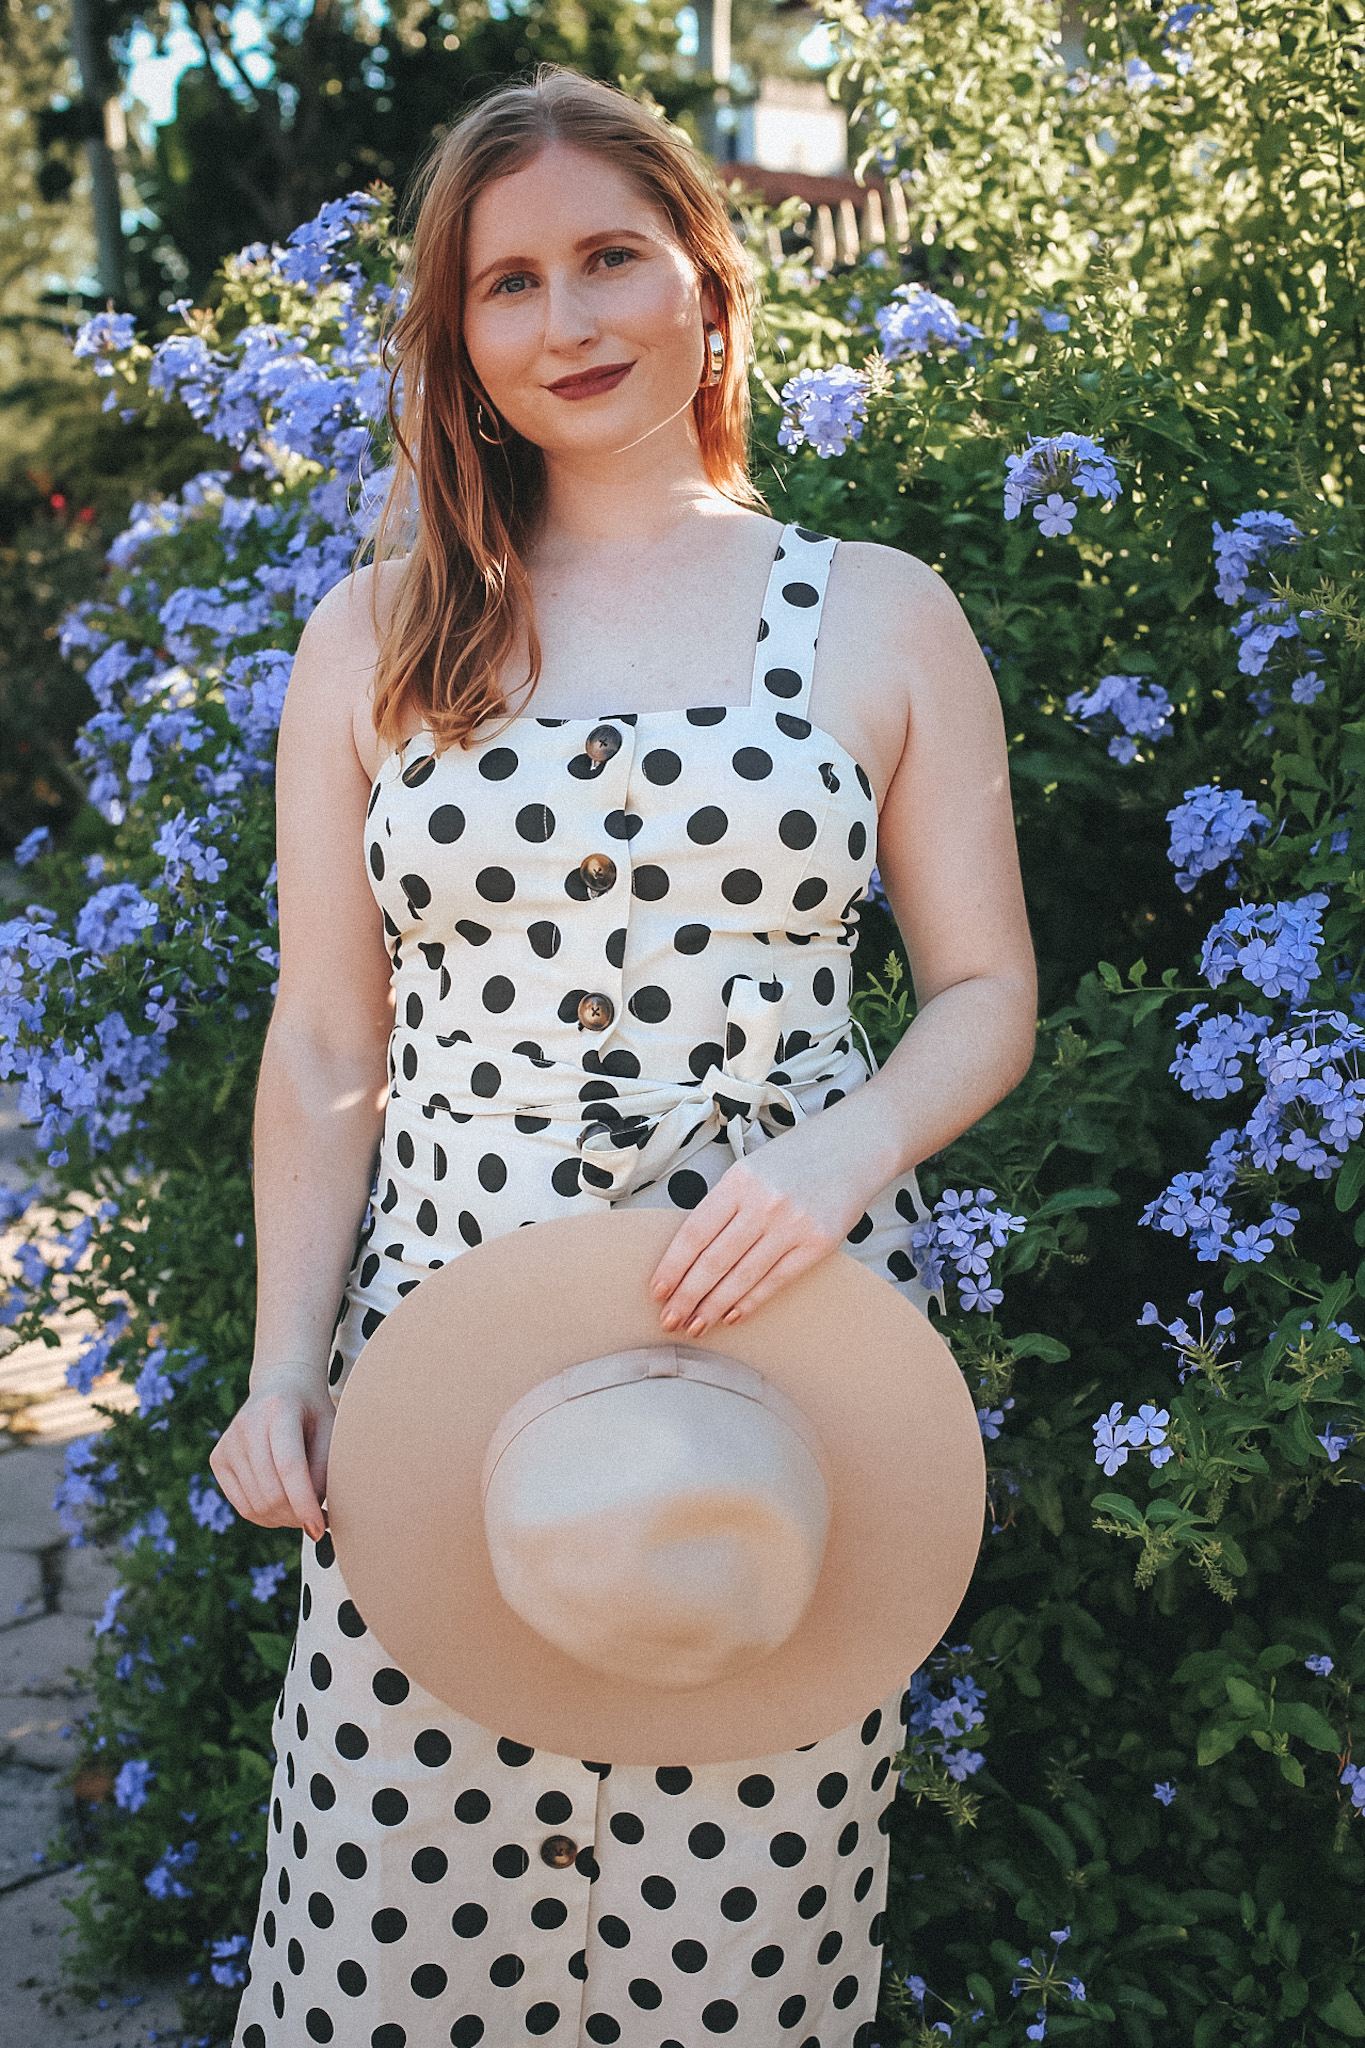 A Budget-Friendly Everyday Dress. Florida style blogger Amanda Burrows of the fashion blog Affordable by Amanda shares her favorite Spring Dresses Under $50. Amanda wears a casual JustFab Belted Button Front Dress with polka dot print. She is also holding a felt Urban Outfitters wide-brim beige hat.